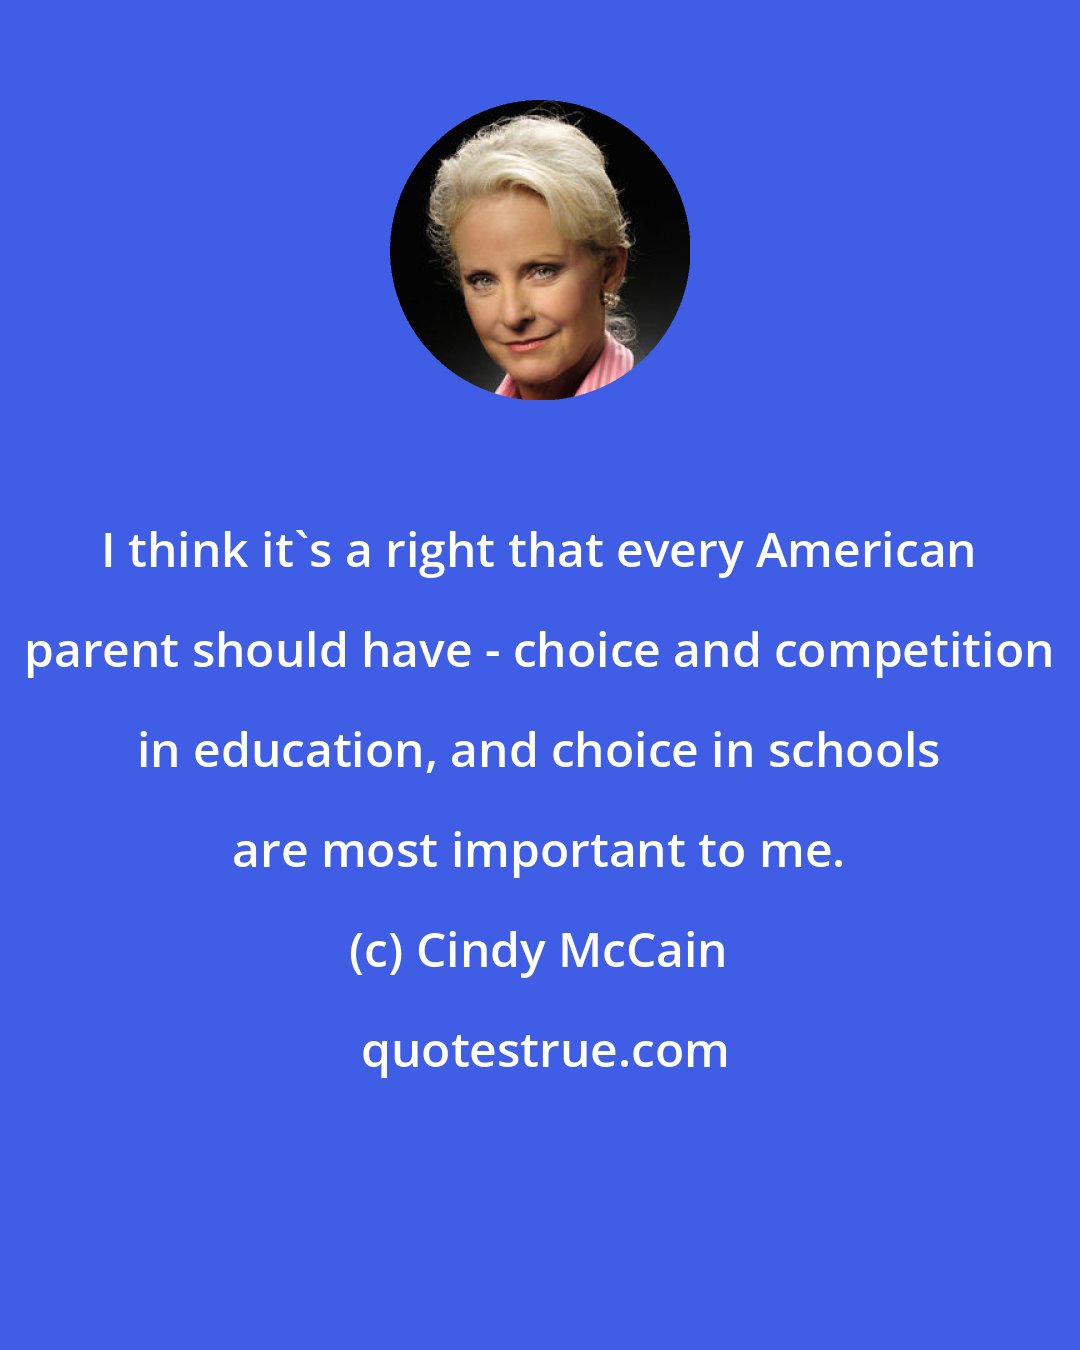 Cindy McCain: I think it's a right that every American parent should have - choice and competition in education, and choice in schools are most important to me.